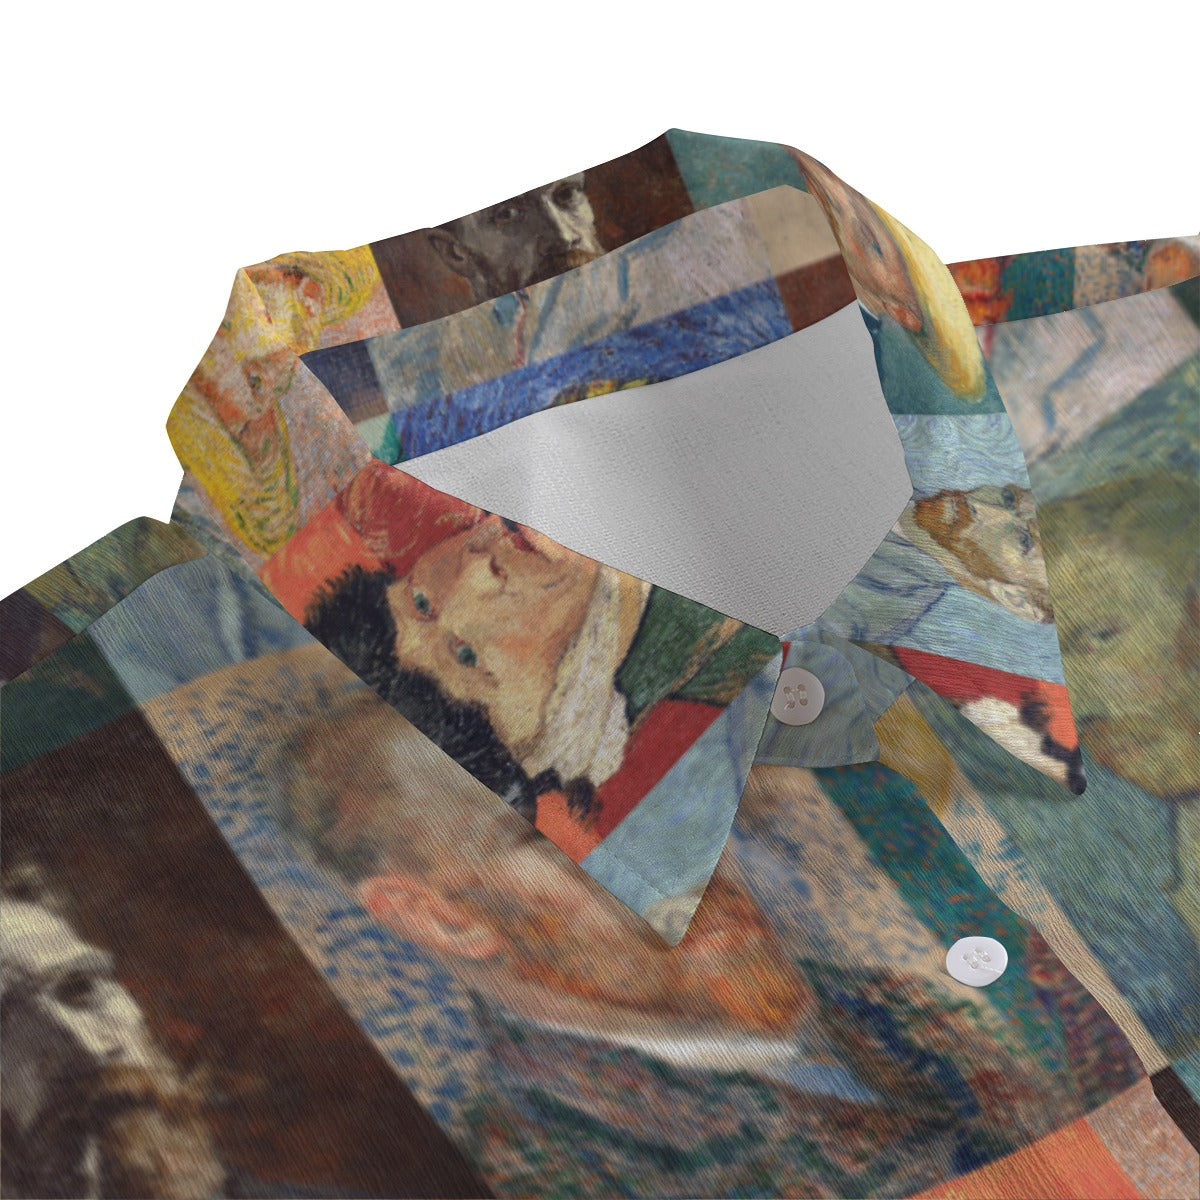 Elegant chiffon blouse inspired by Van Gogh, perfect for art lovers.